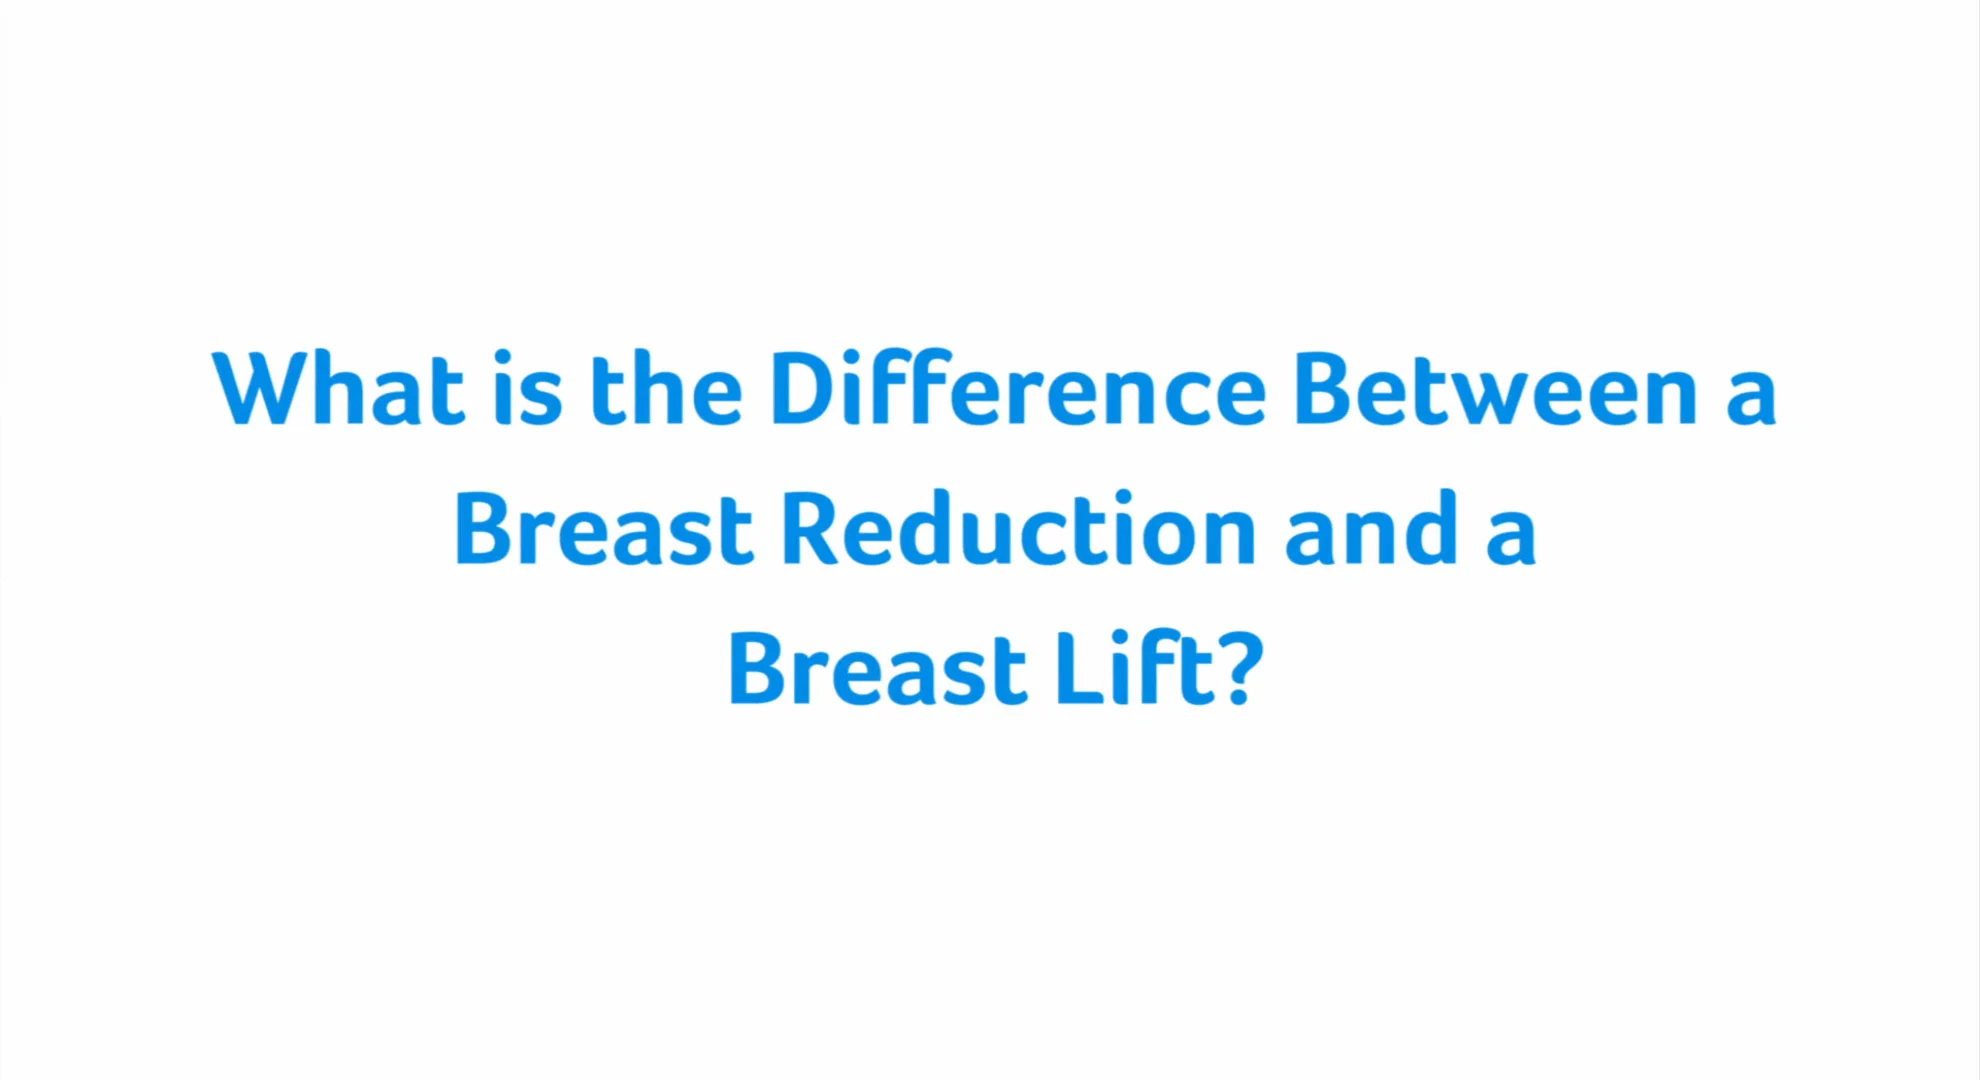 Breast Reduction Or Breast Lift?